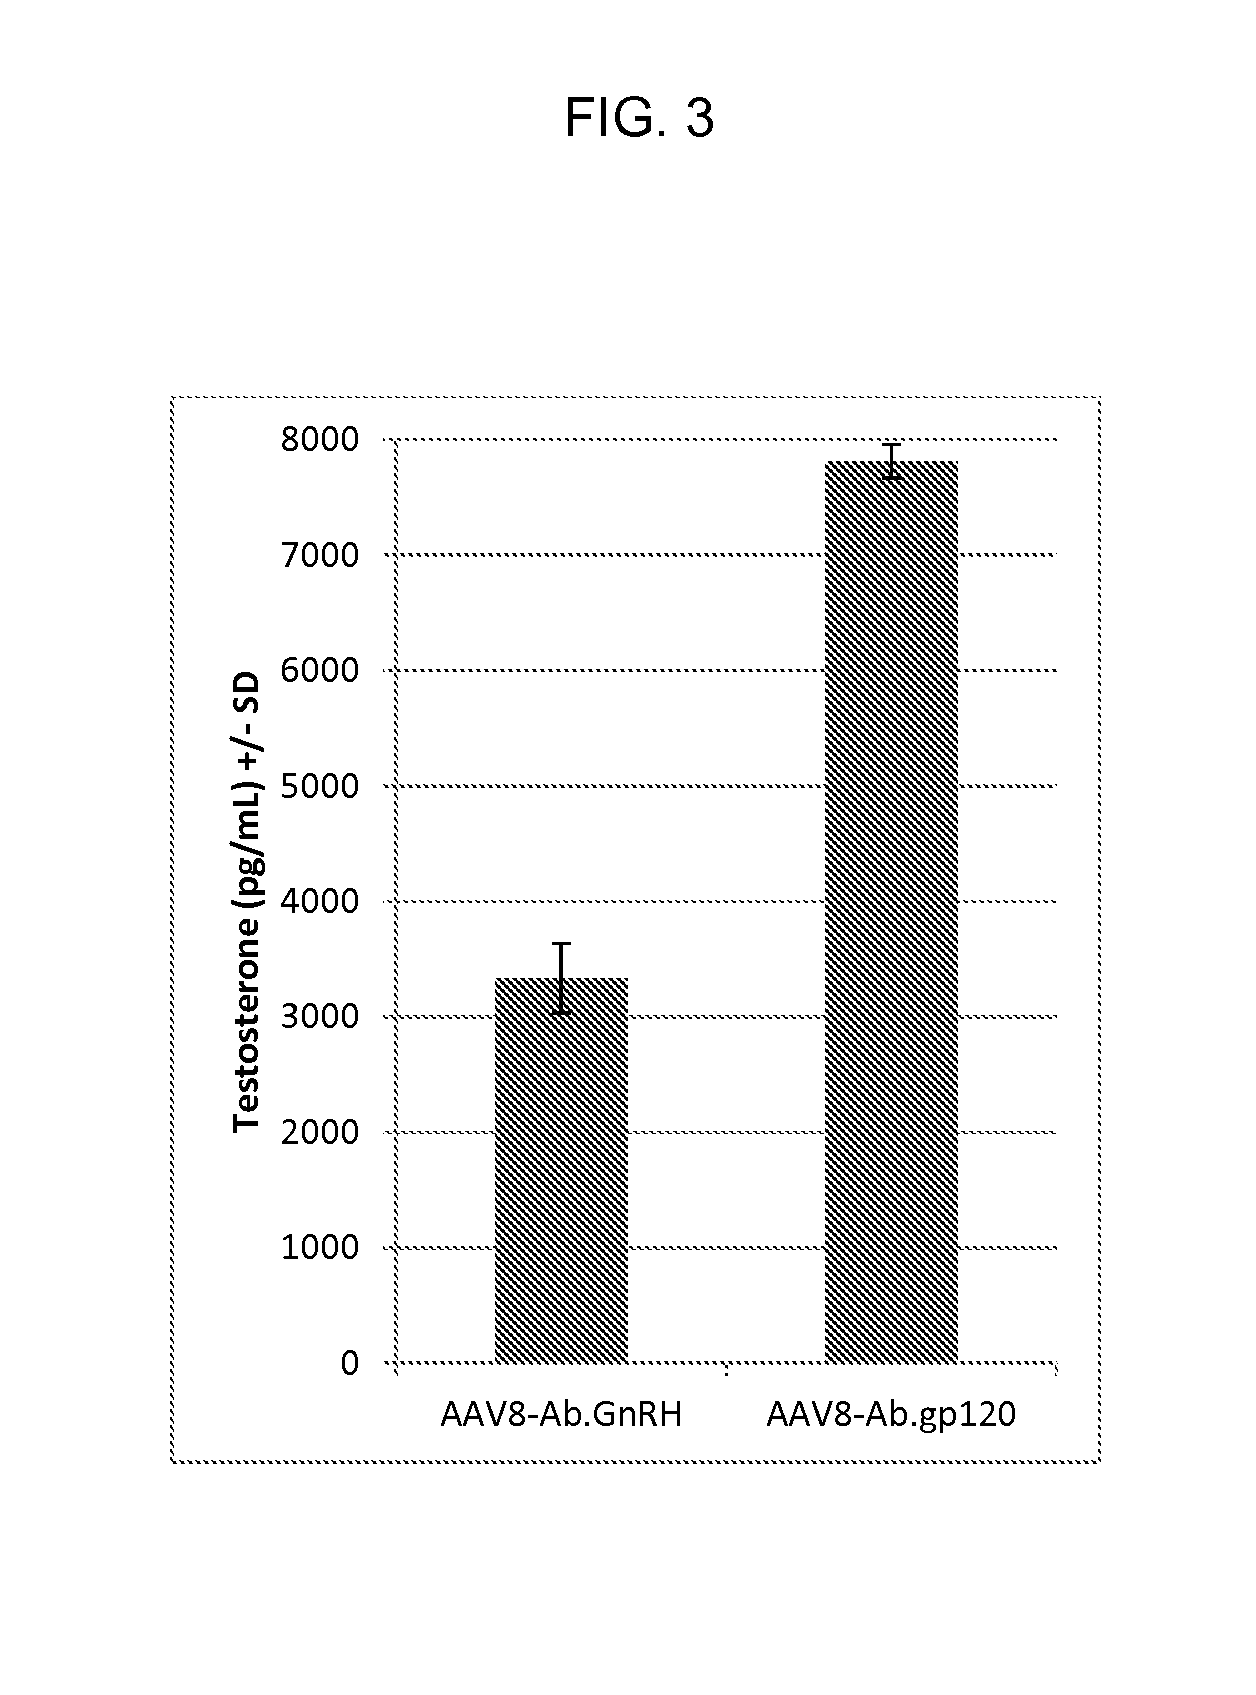 Veterinary composition and methods for non-surgical neutering and castration